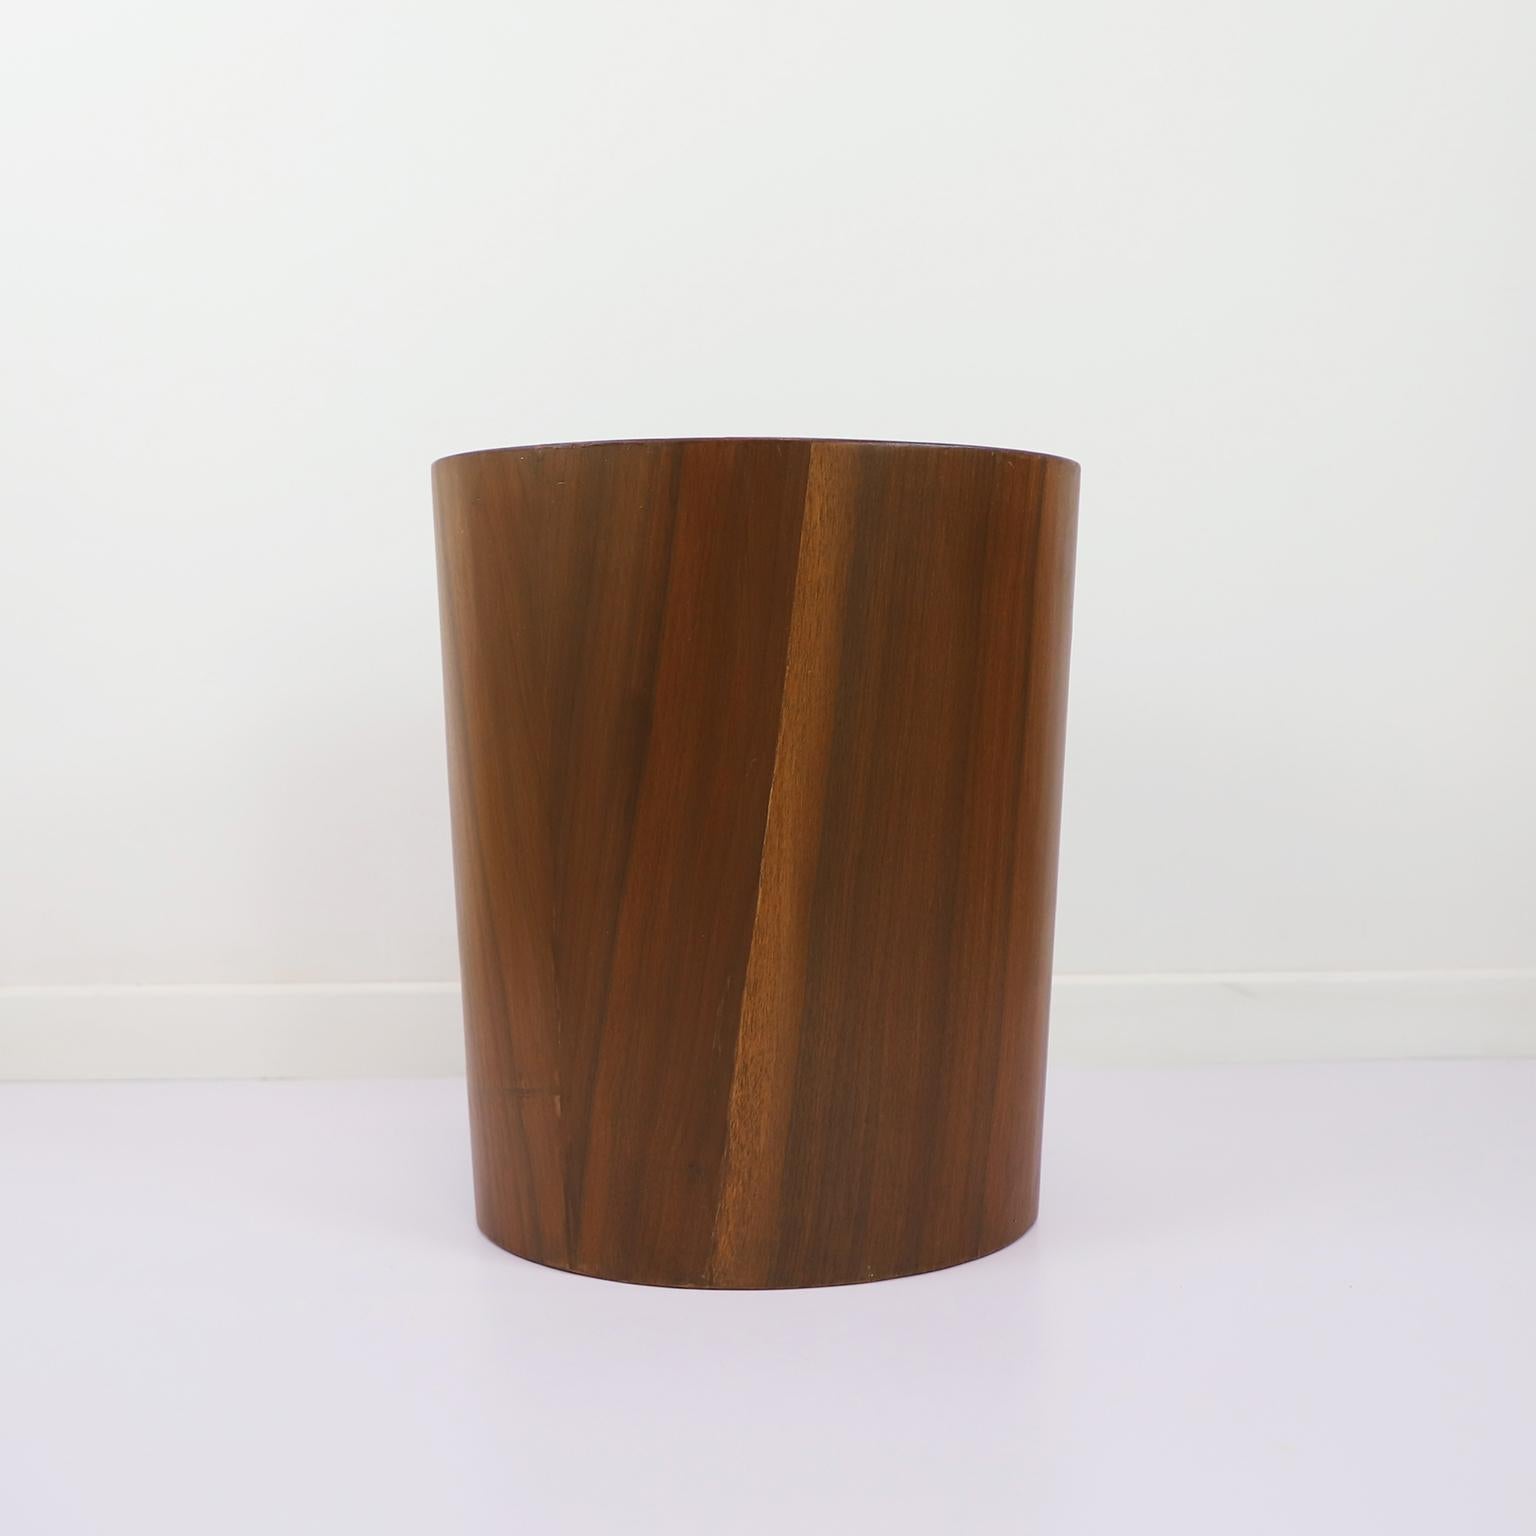 Circa 1960, We offer this mid century Mahogany Plywood trash can. Recently restored.